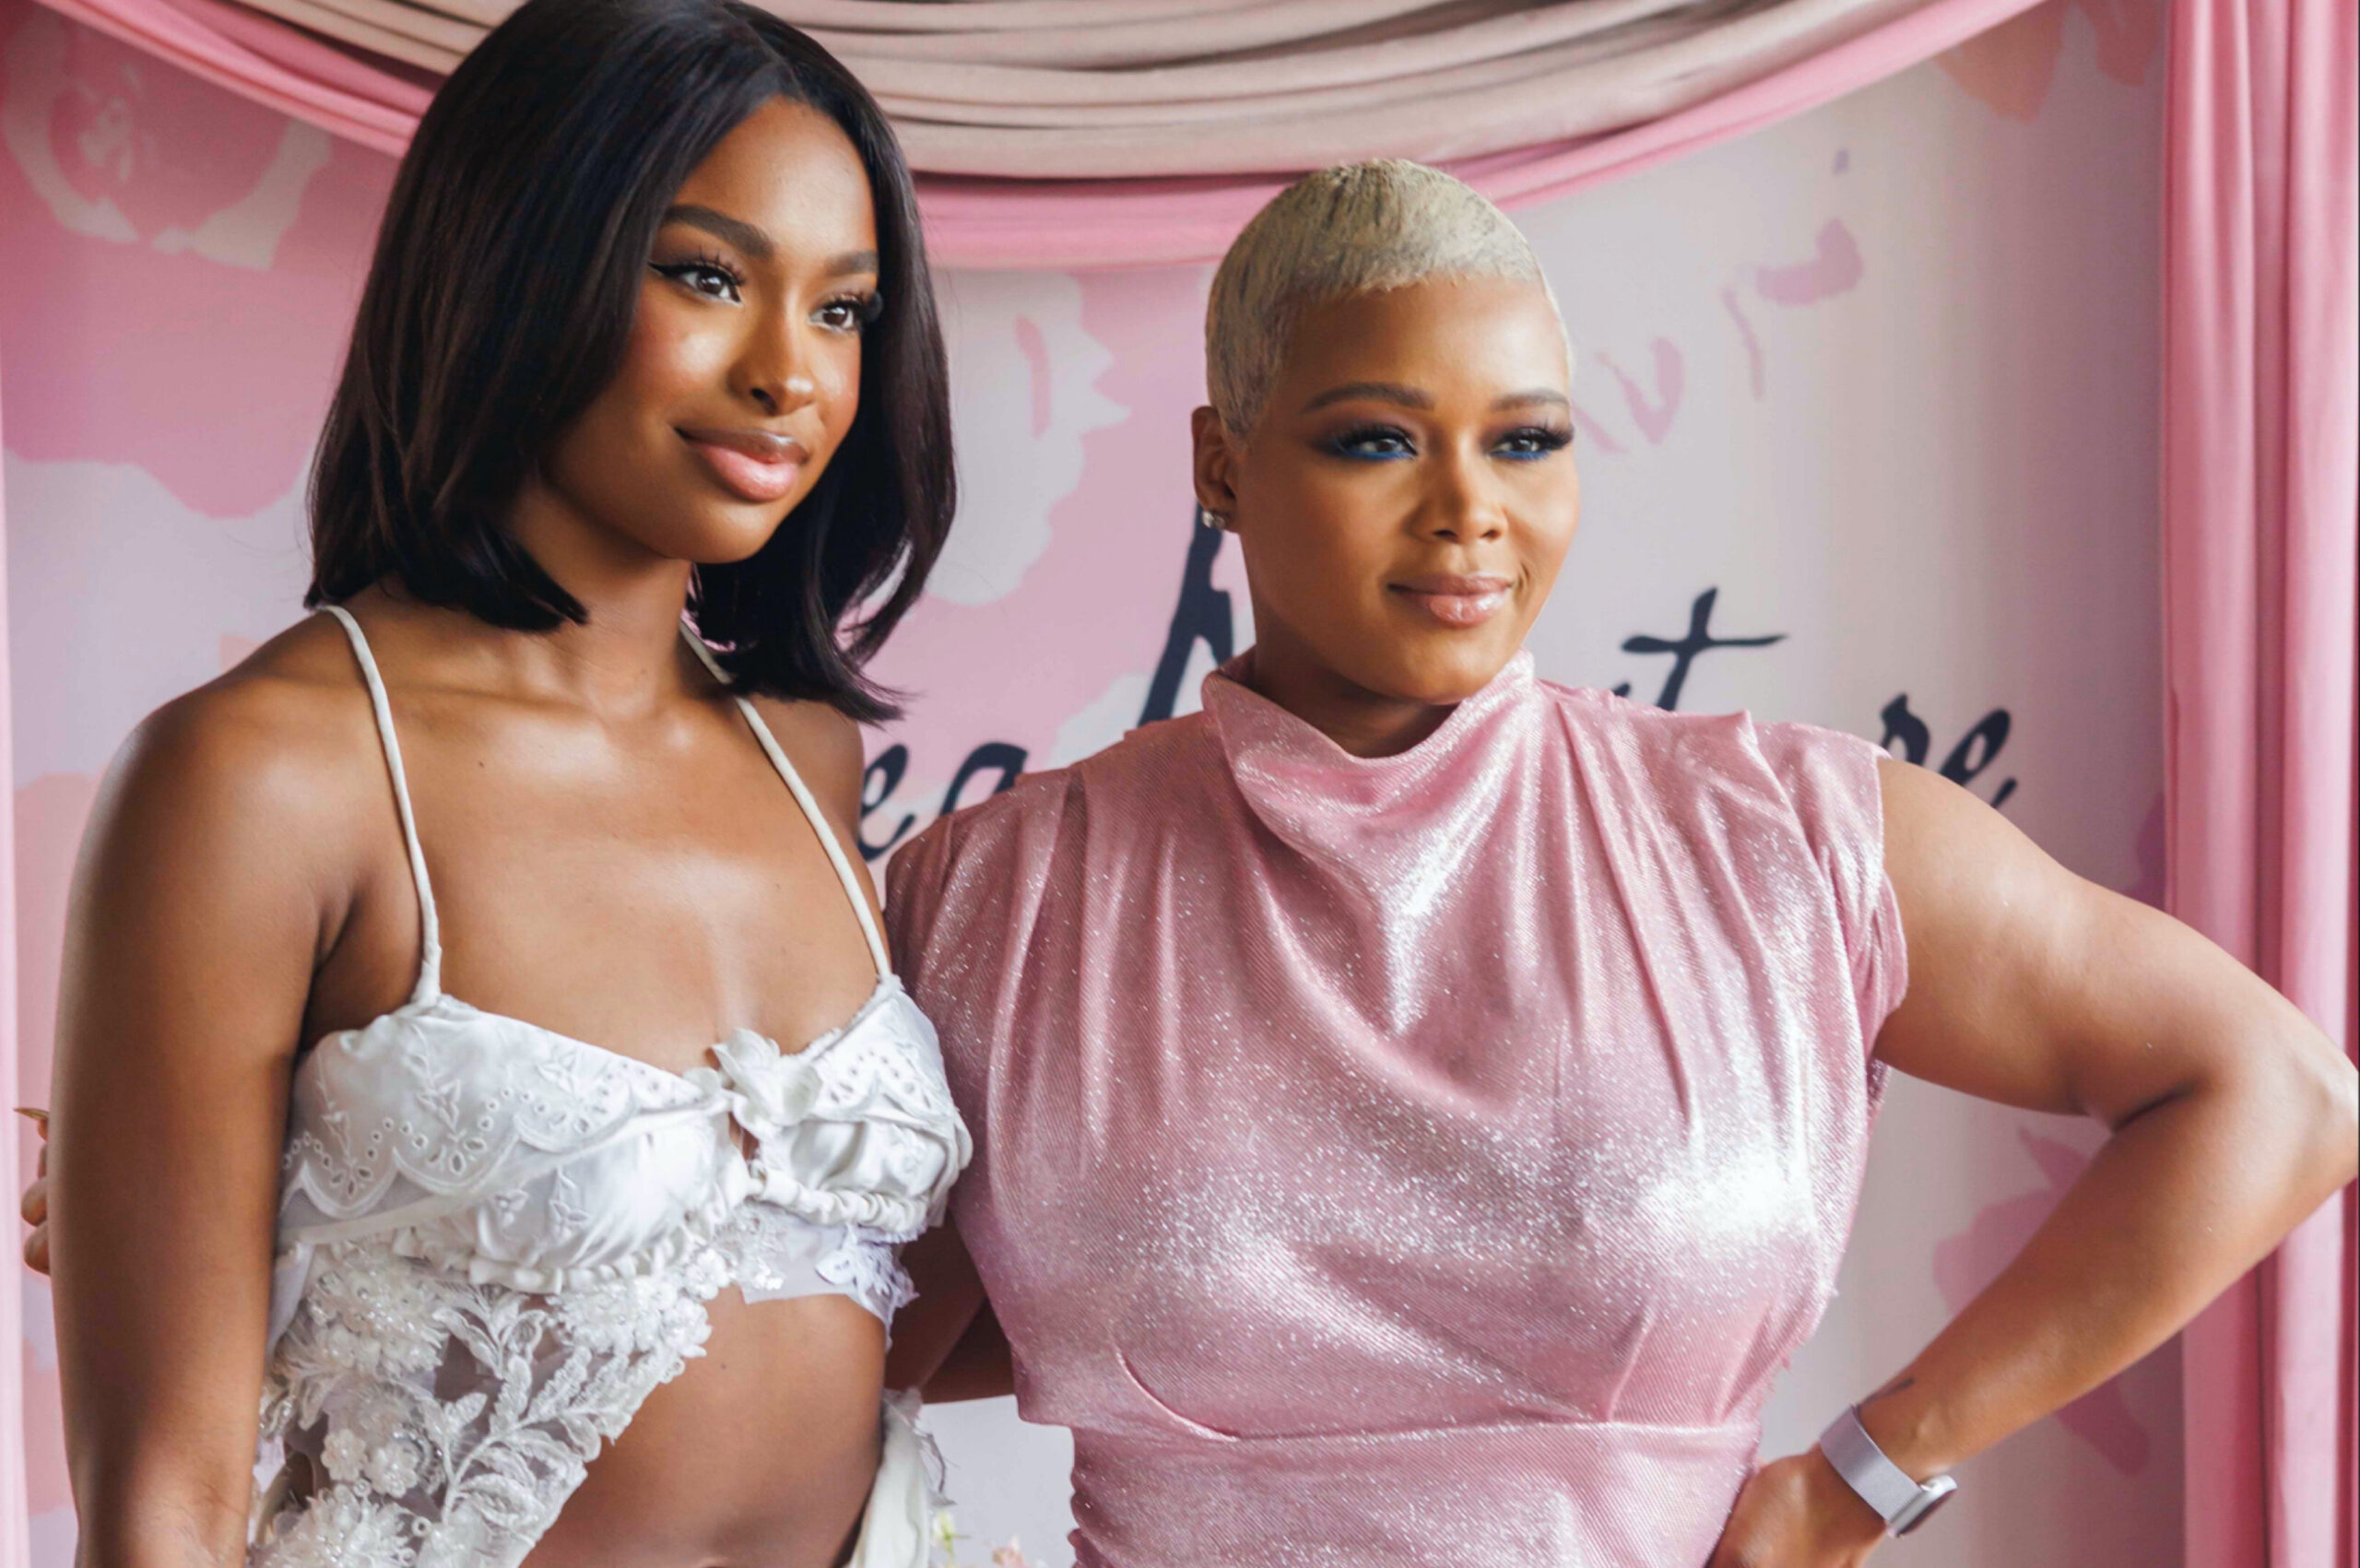 Shea Moisture’s Shea in Bloom Deodorant Launch with Coco Jones, Makeup Shayla, and more! – Fashion Bomb Daily